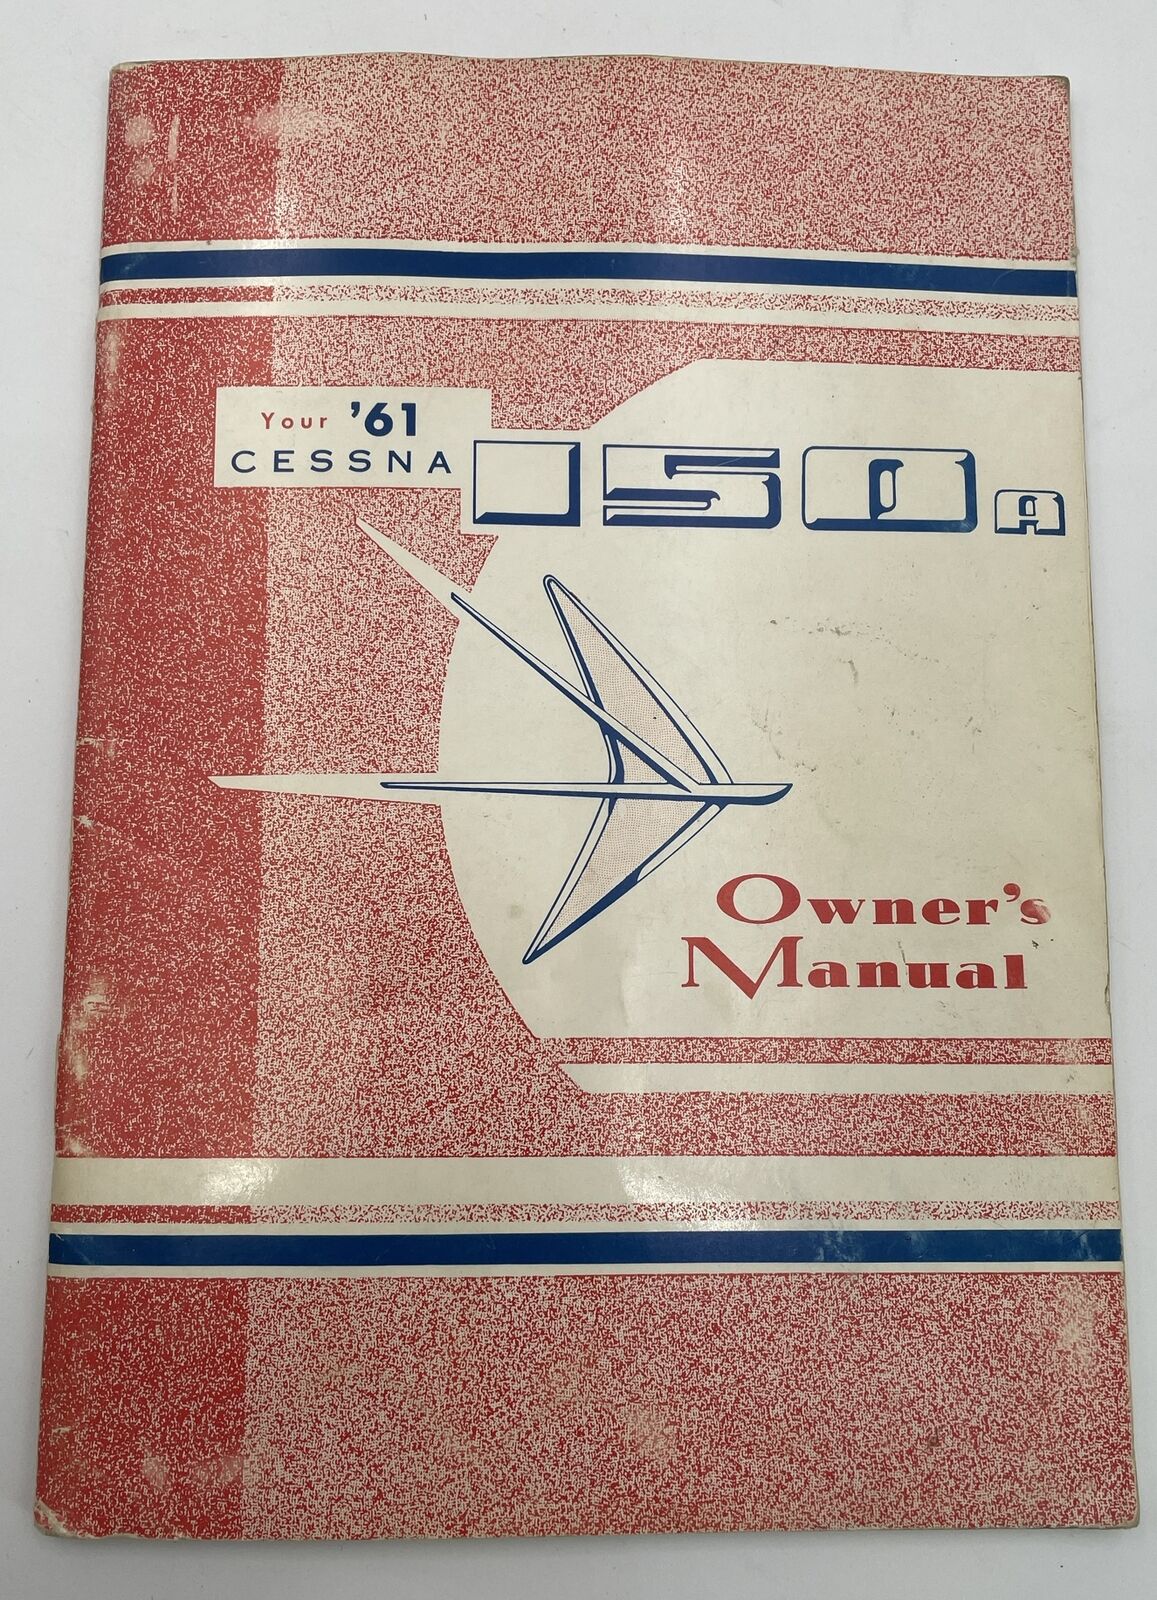 1961 Cessna 150A Airplane Owner’s Manual Vintage 150 1966